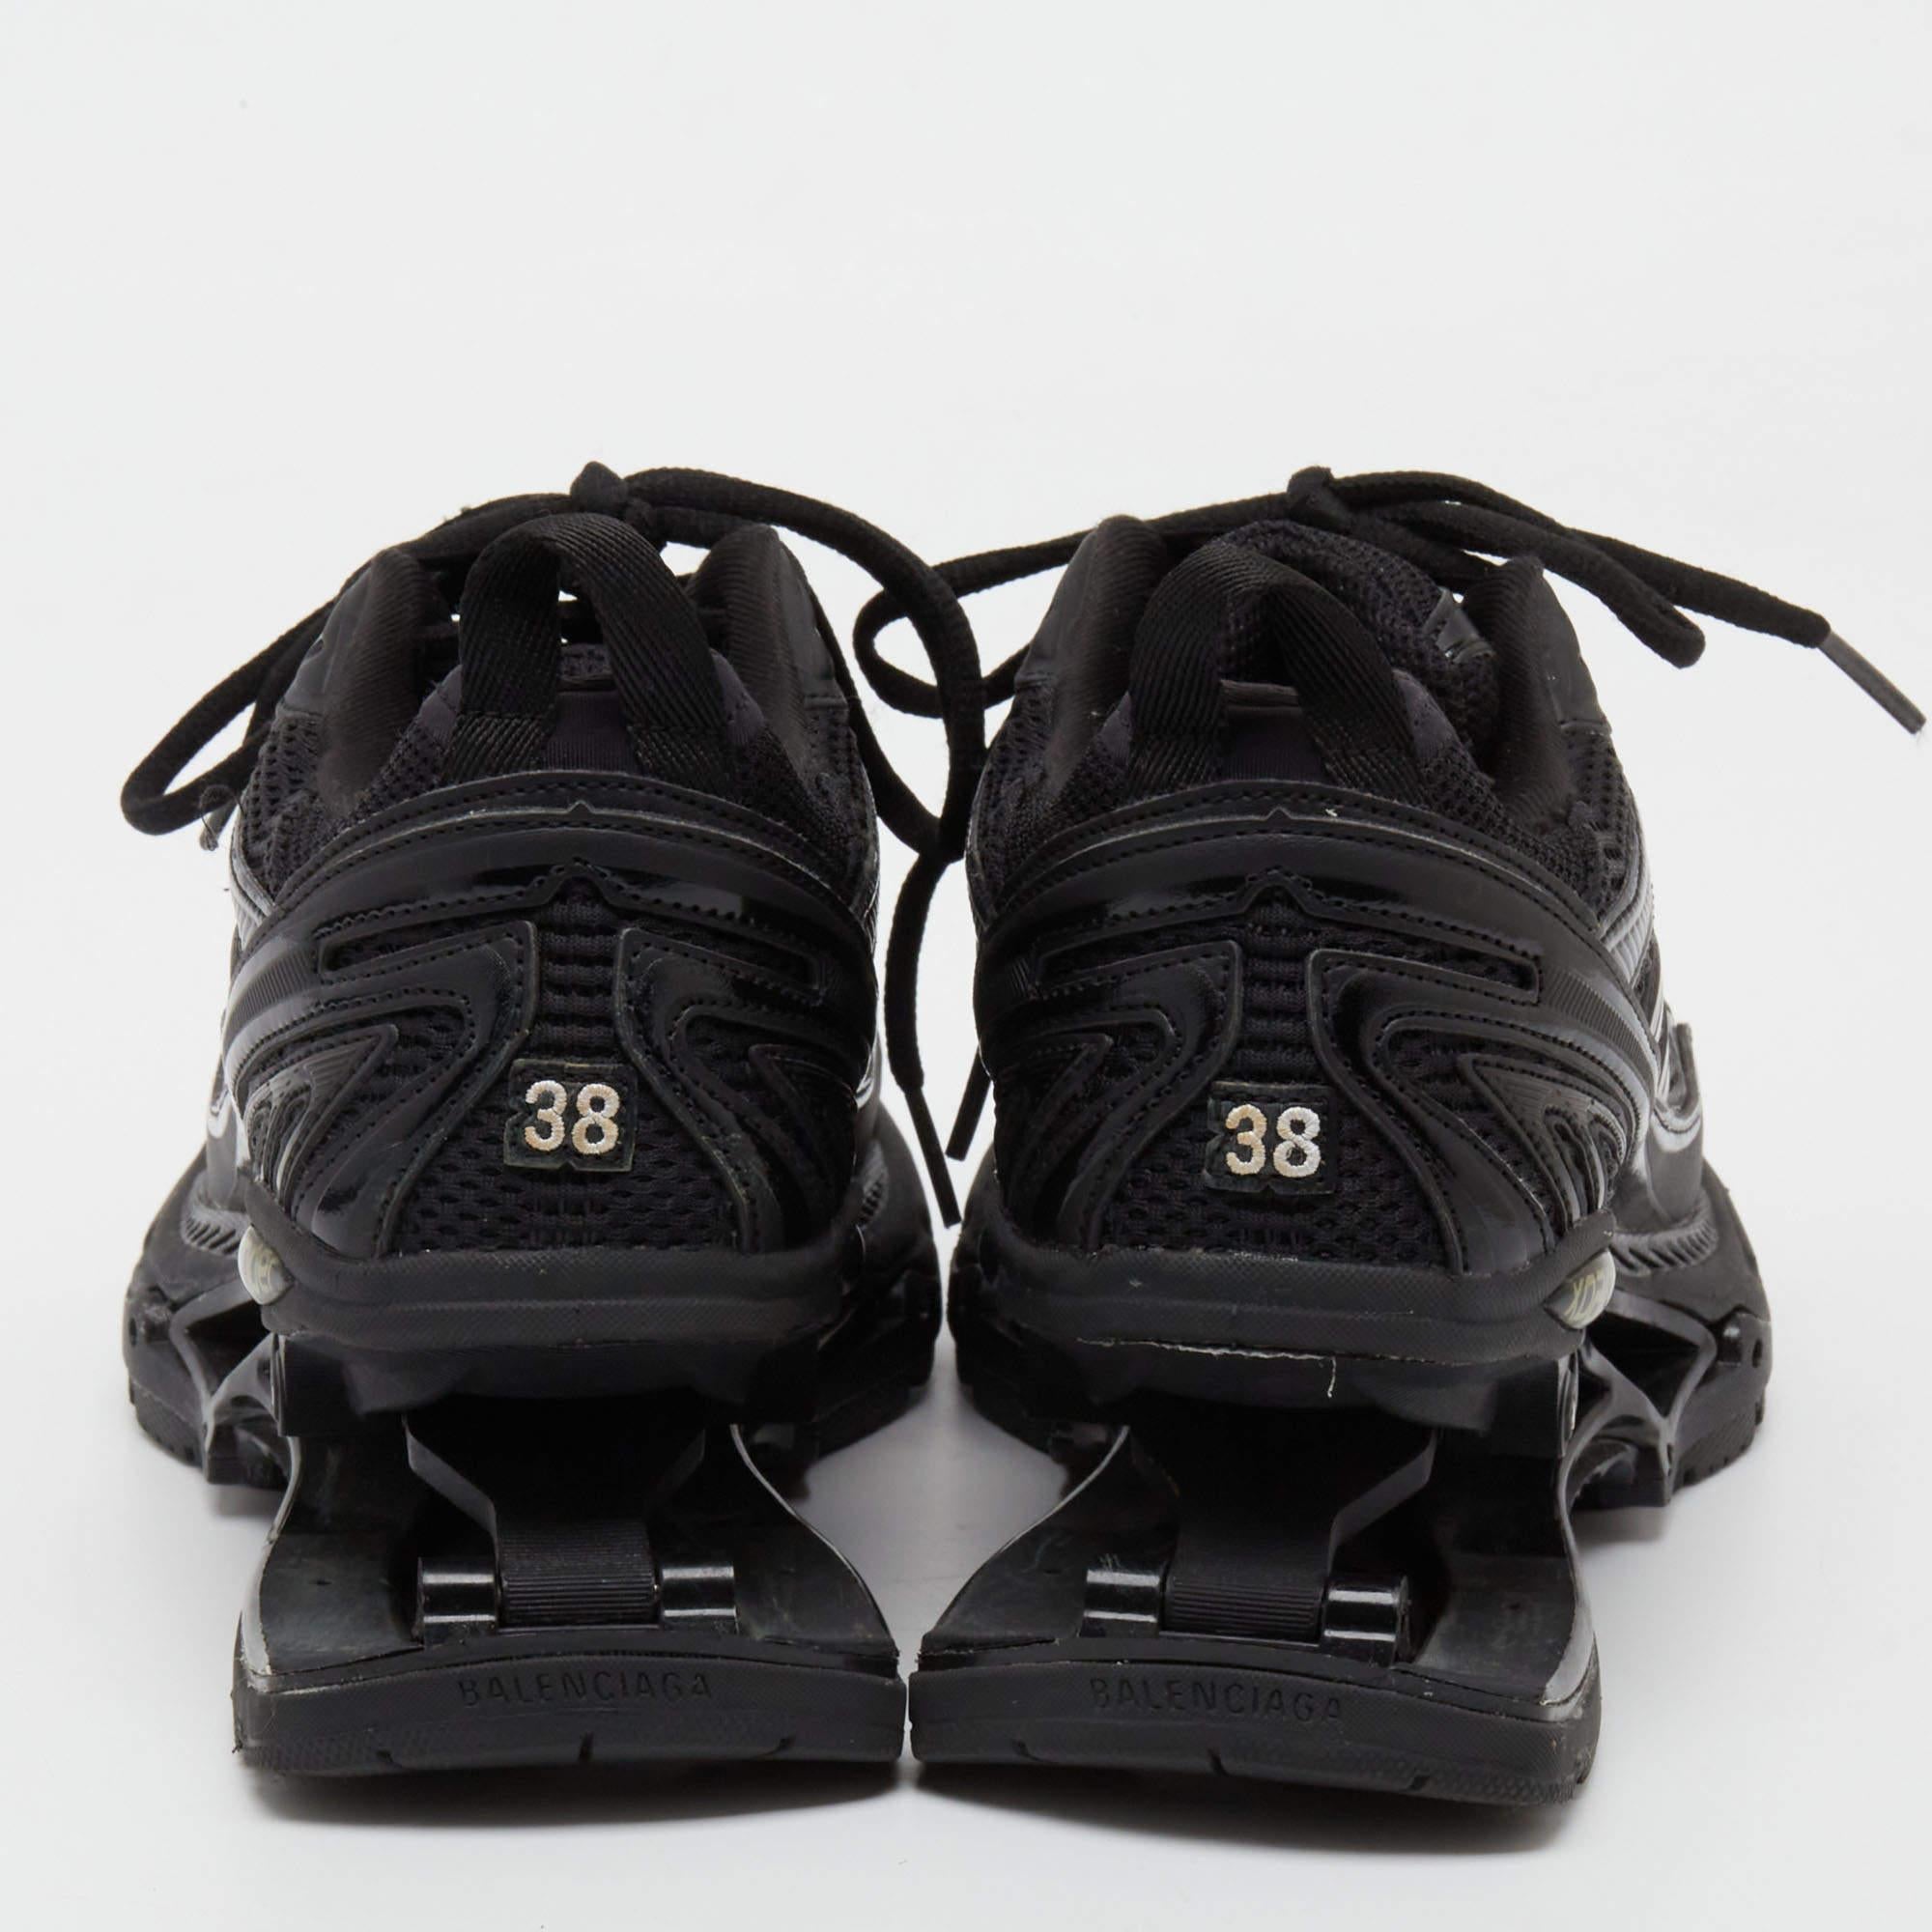 Balenciaga Black Mesh And Synthetic Leather Runner Low Top Sneakers Size 38 For Sale 1